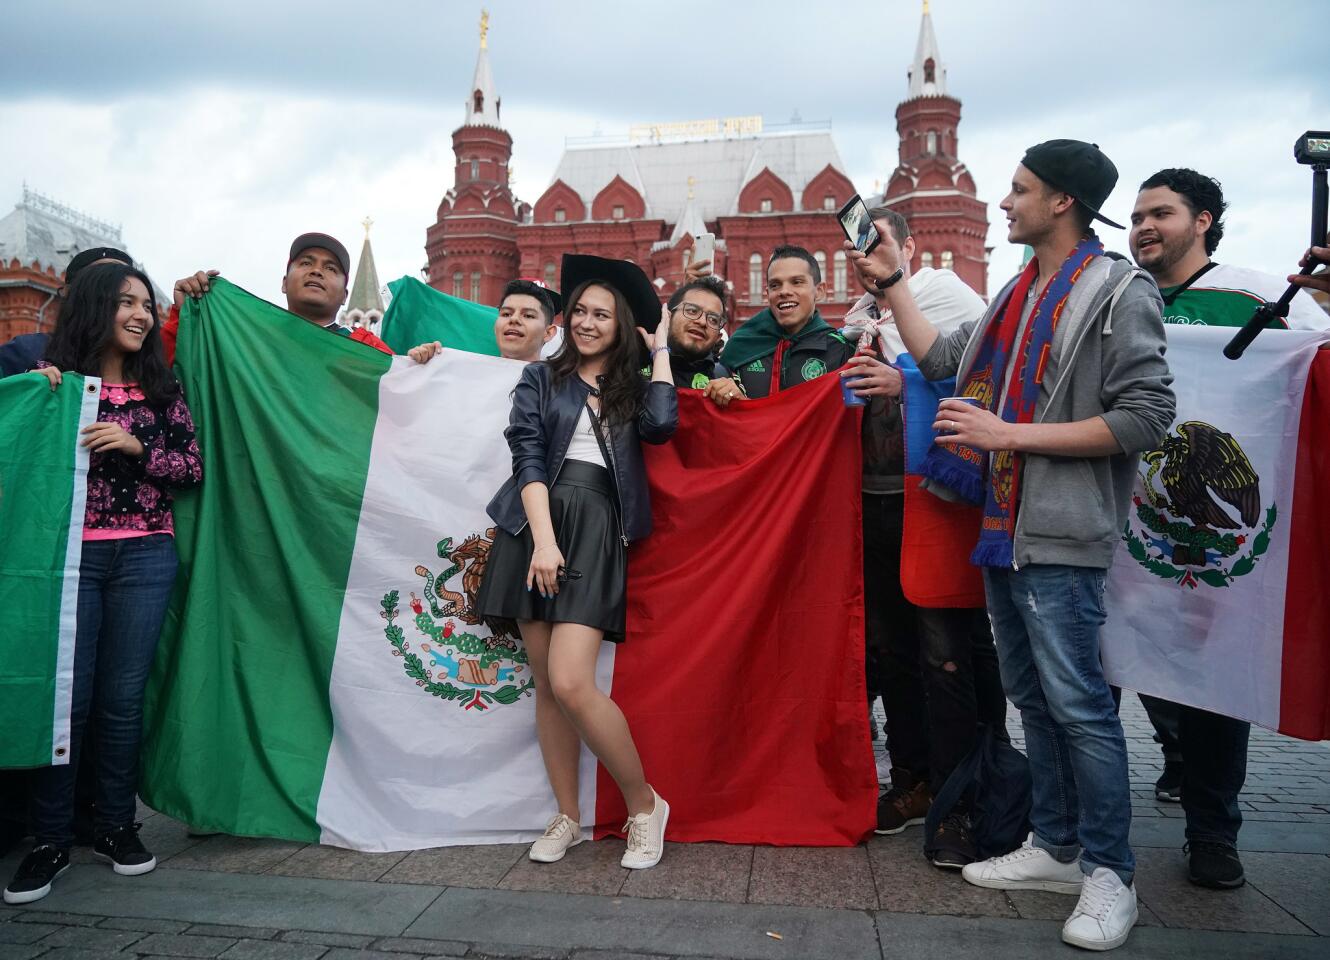 MOSCOW, RUSSIA - JUNE 11: Football fans from Russia and Mexico pose for selfies together near Red Square ahead of the World Cup on June 11, 2018 in Moscow, Russia. Moscow and Russia is gearing up for the start of the World Cup tournament. FIFA expects more than three billion viewers for the World Cup that begins this week in Russia. (Photo by Christopher Furlong/Getty Images) ** OUTS - ELSENT, FPG, CM - OUTS * NM, PH, VA if sourced by CT, LA or MoD **